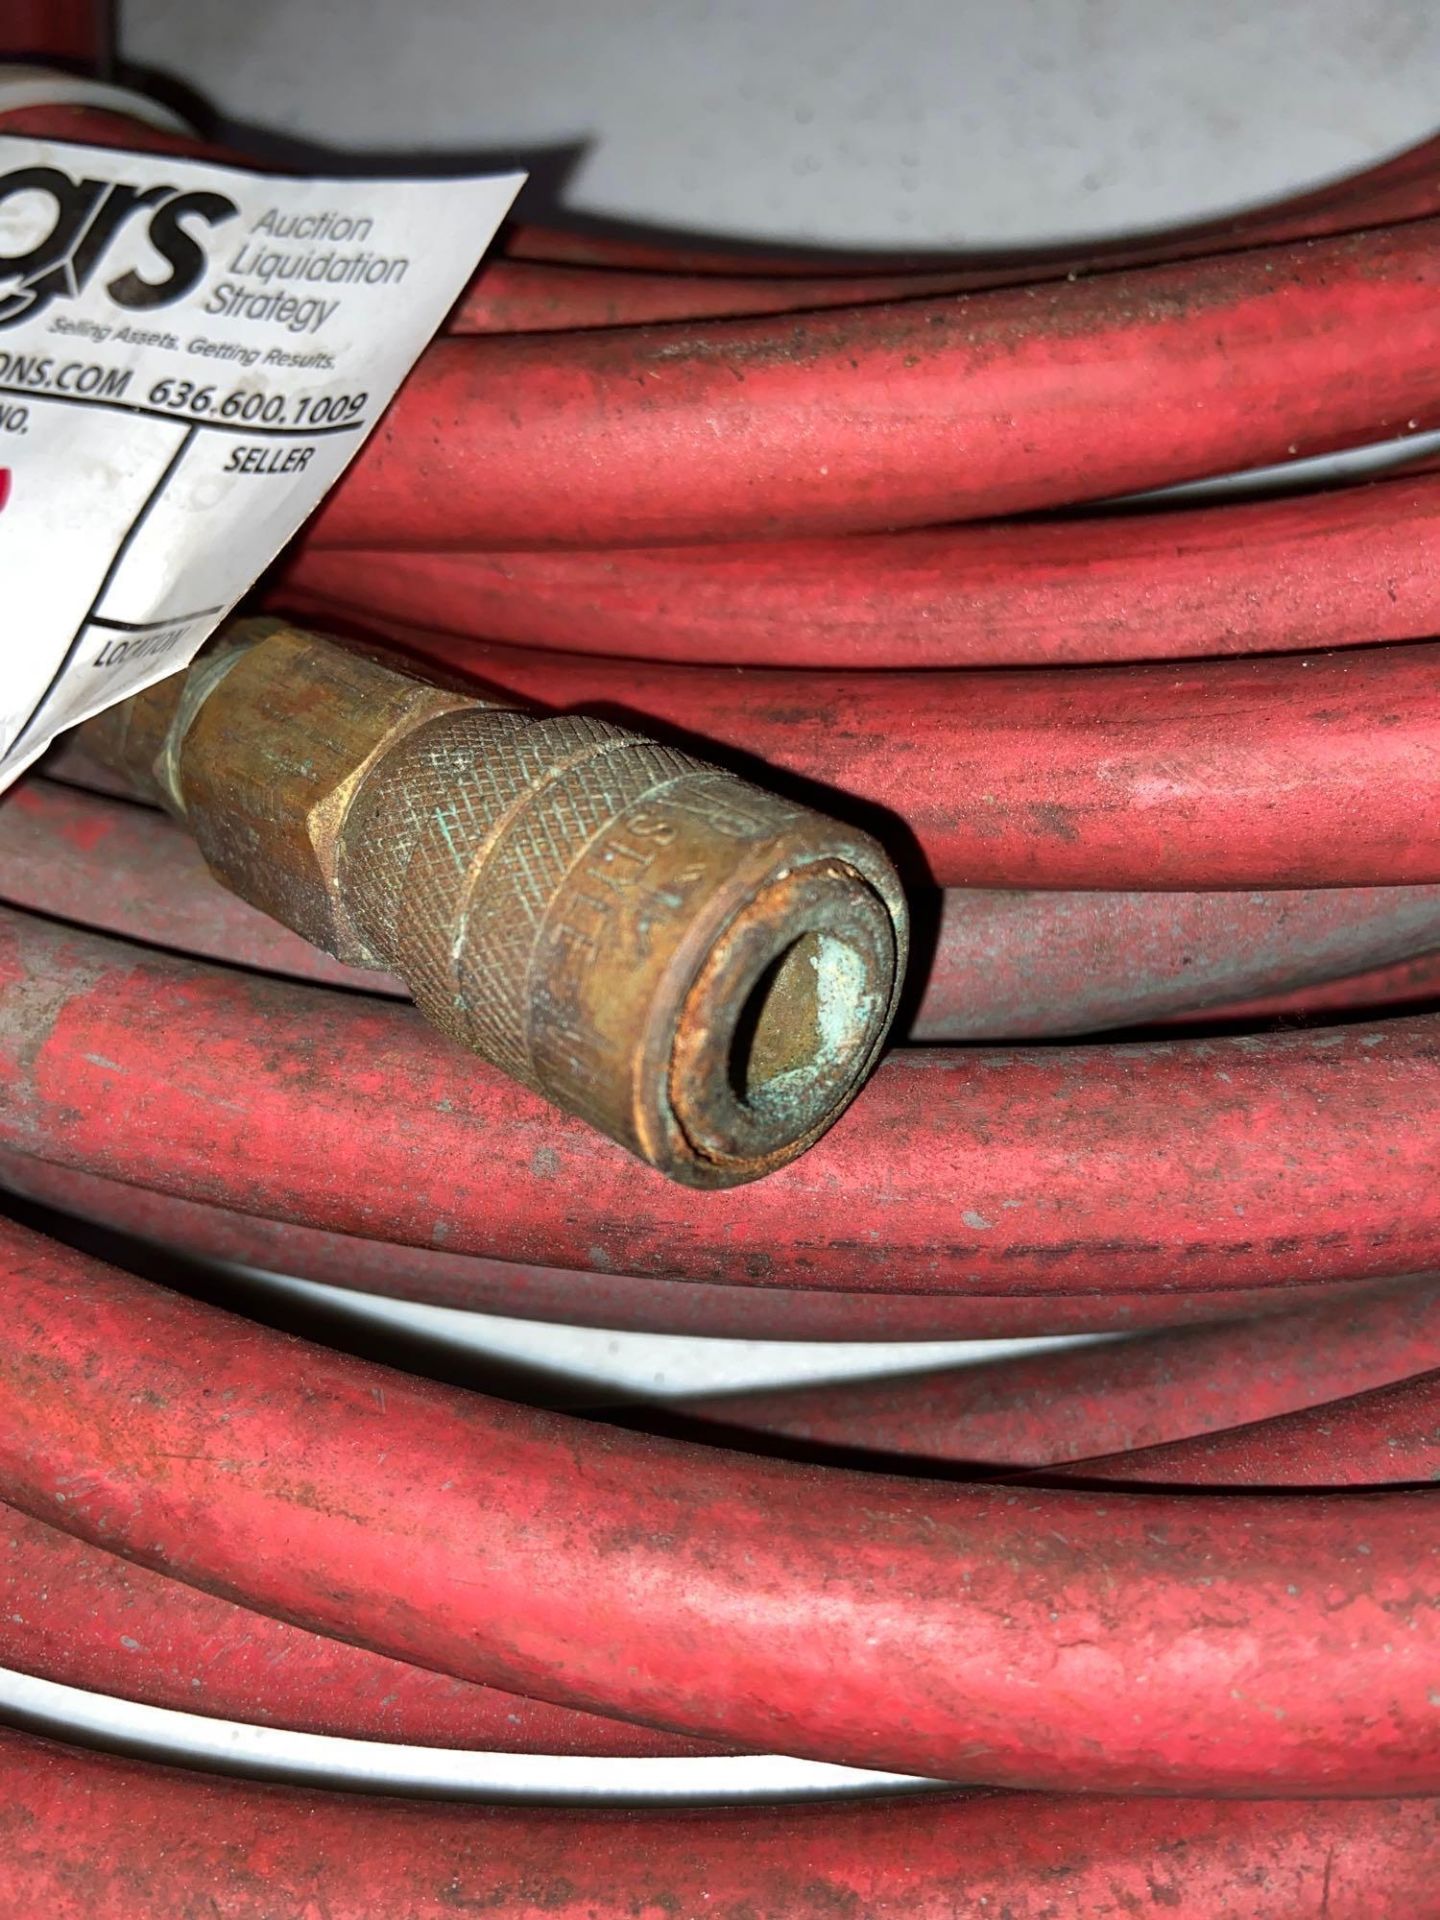 Air Hoses - Image 2 of 4